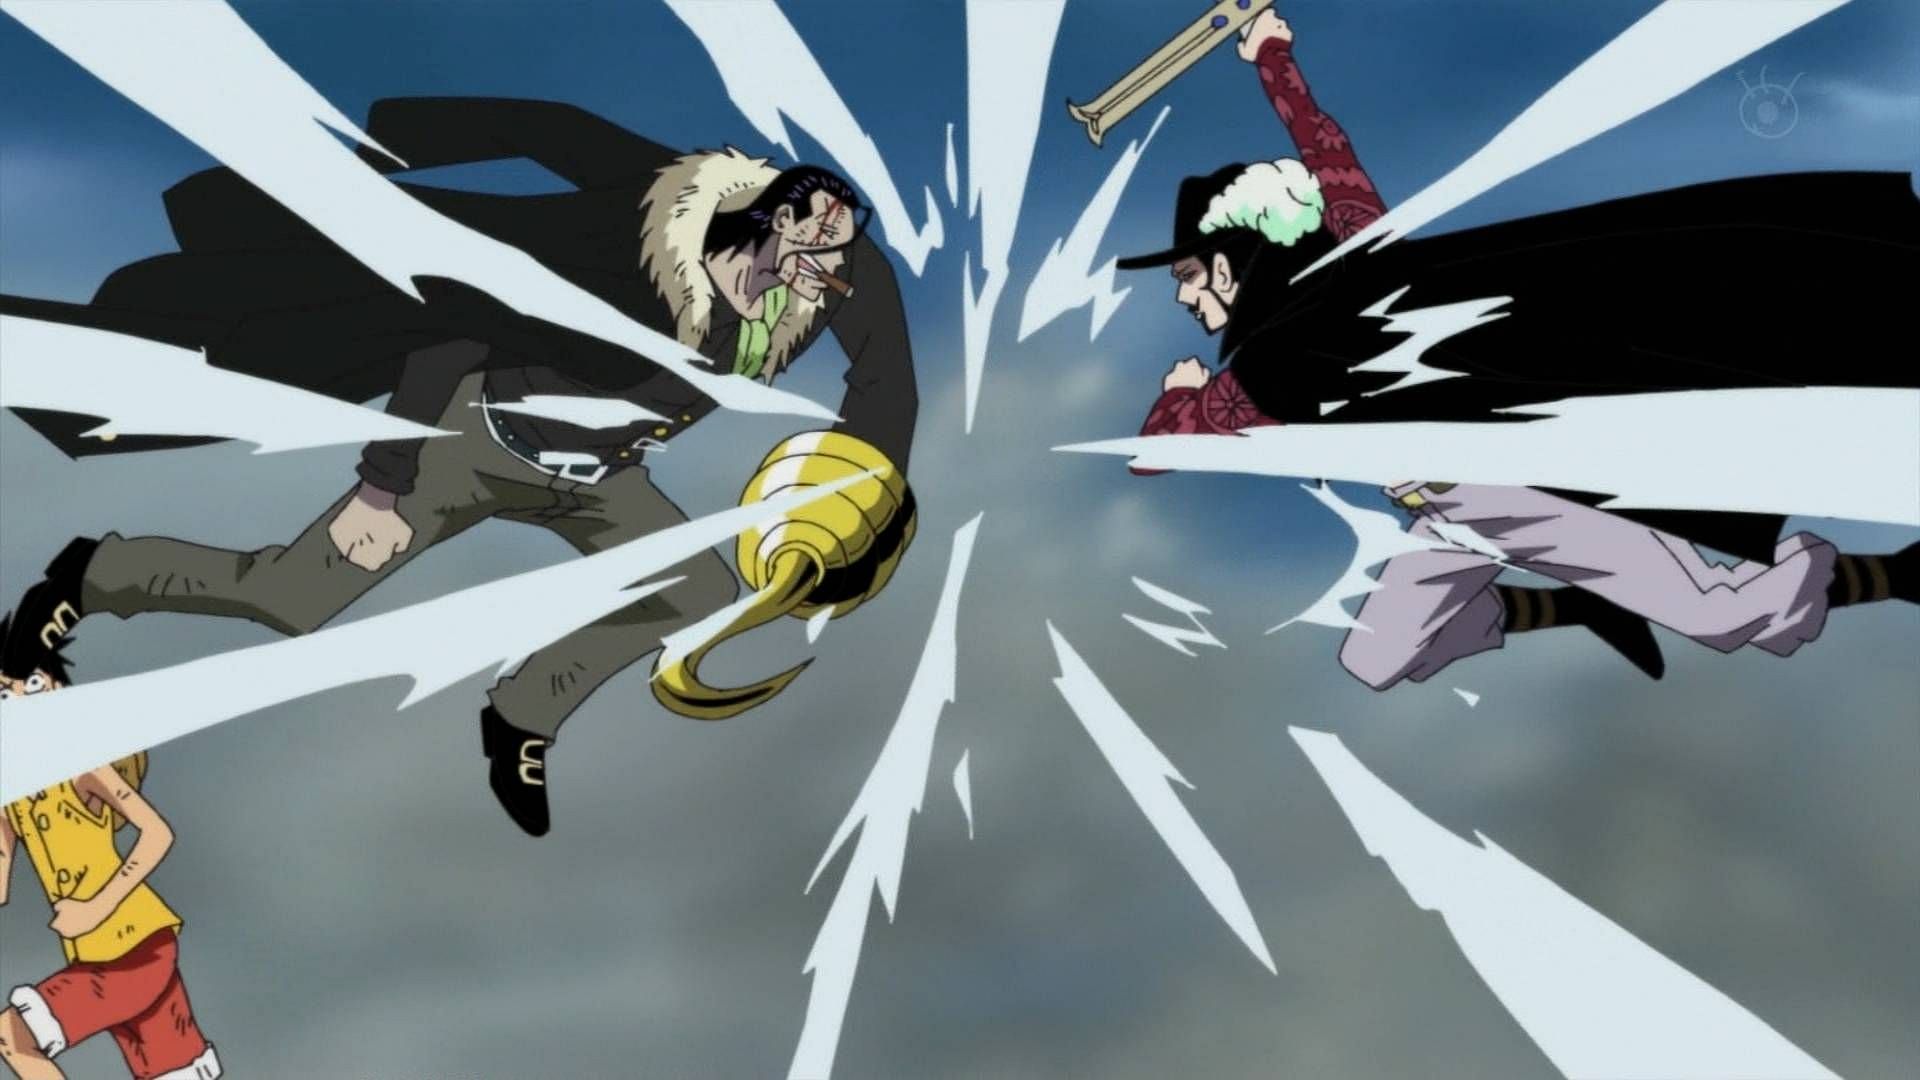 Crocodile seen clashing with Mihawk to protect Luffy in the One Piece anime (Image via Toei Animation)